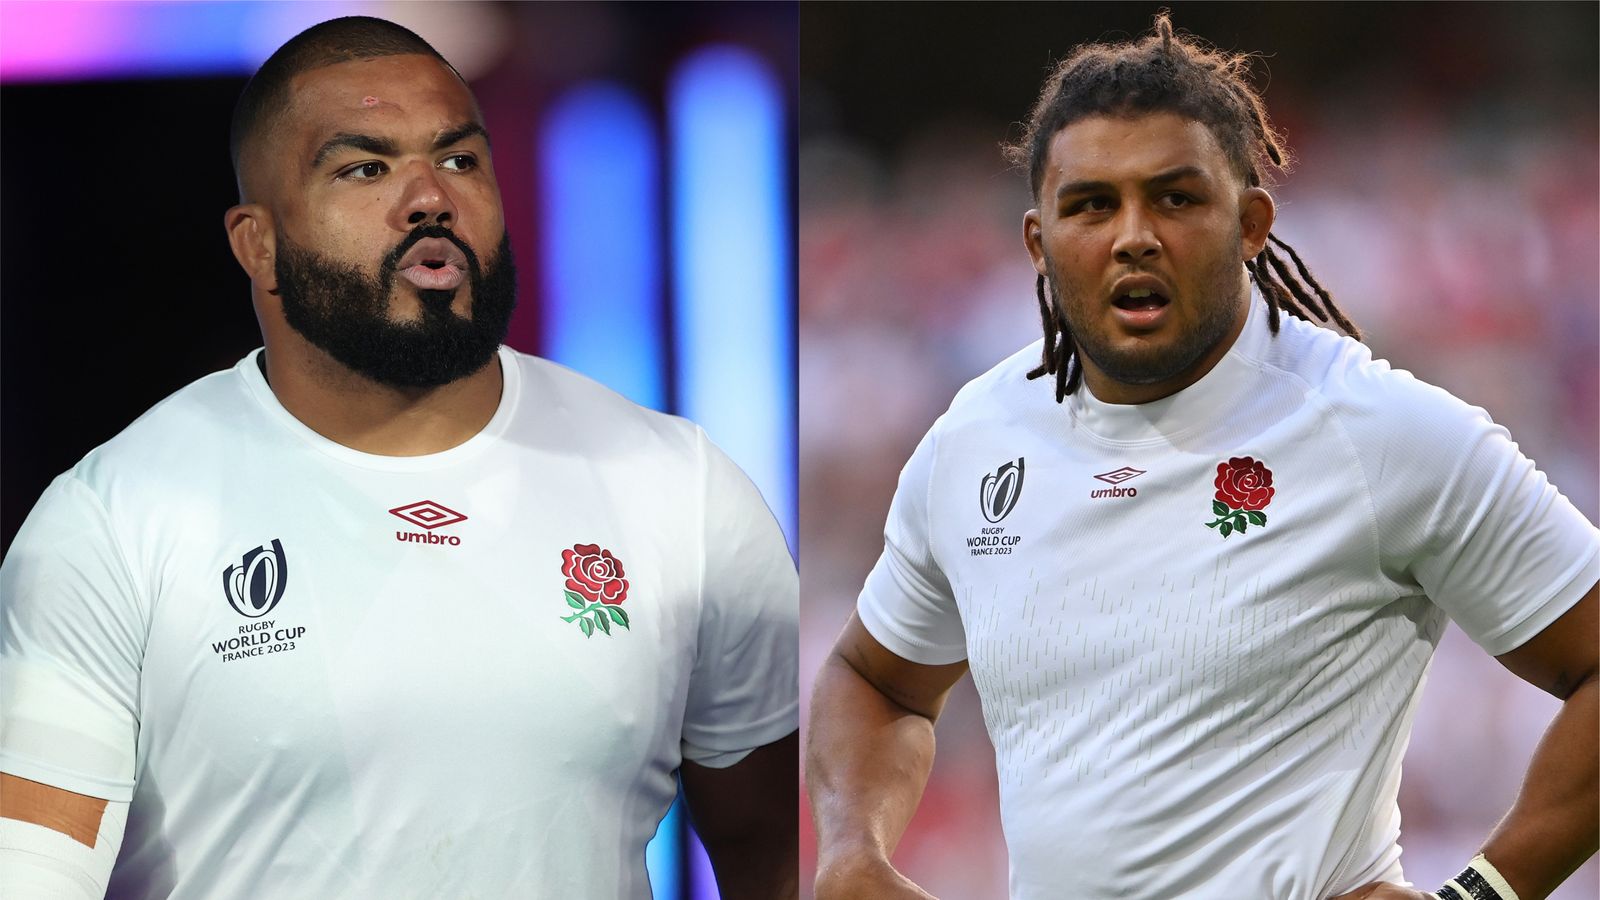 England internationals Kyle Sinckler and Lewis Ludlam joining Toulon in France's Top 14